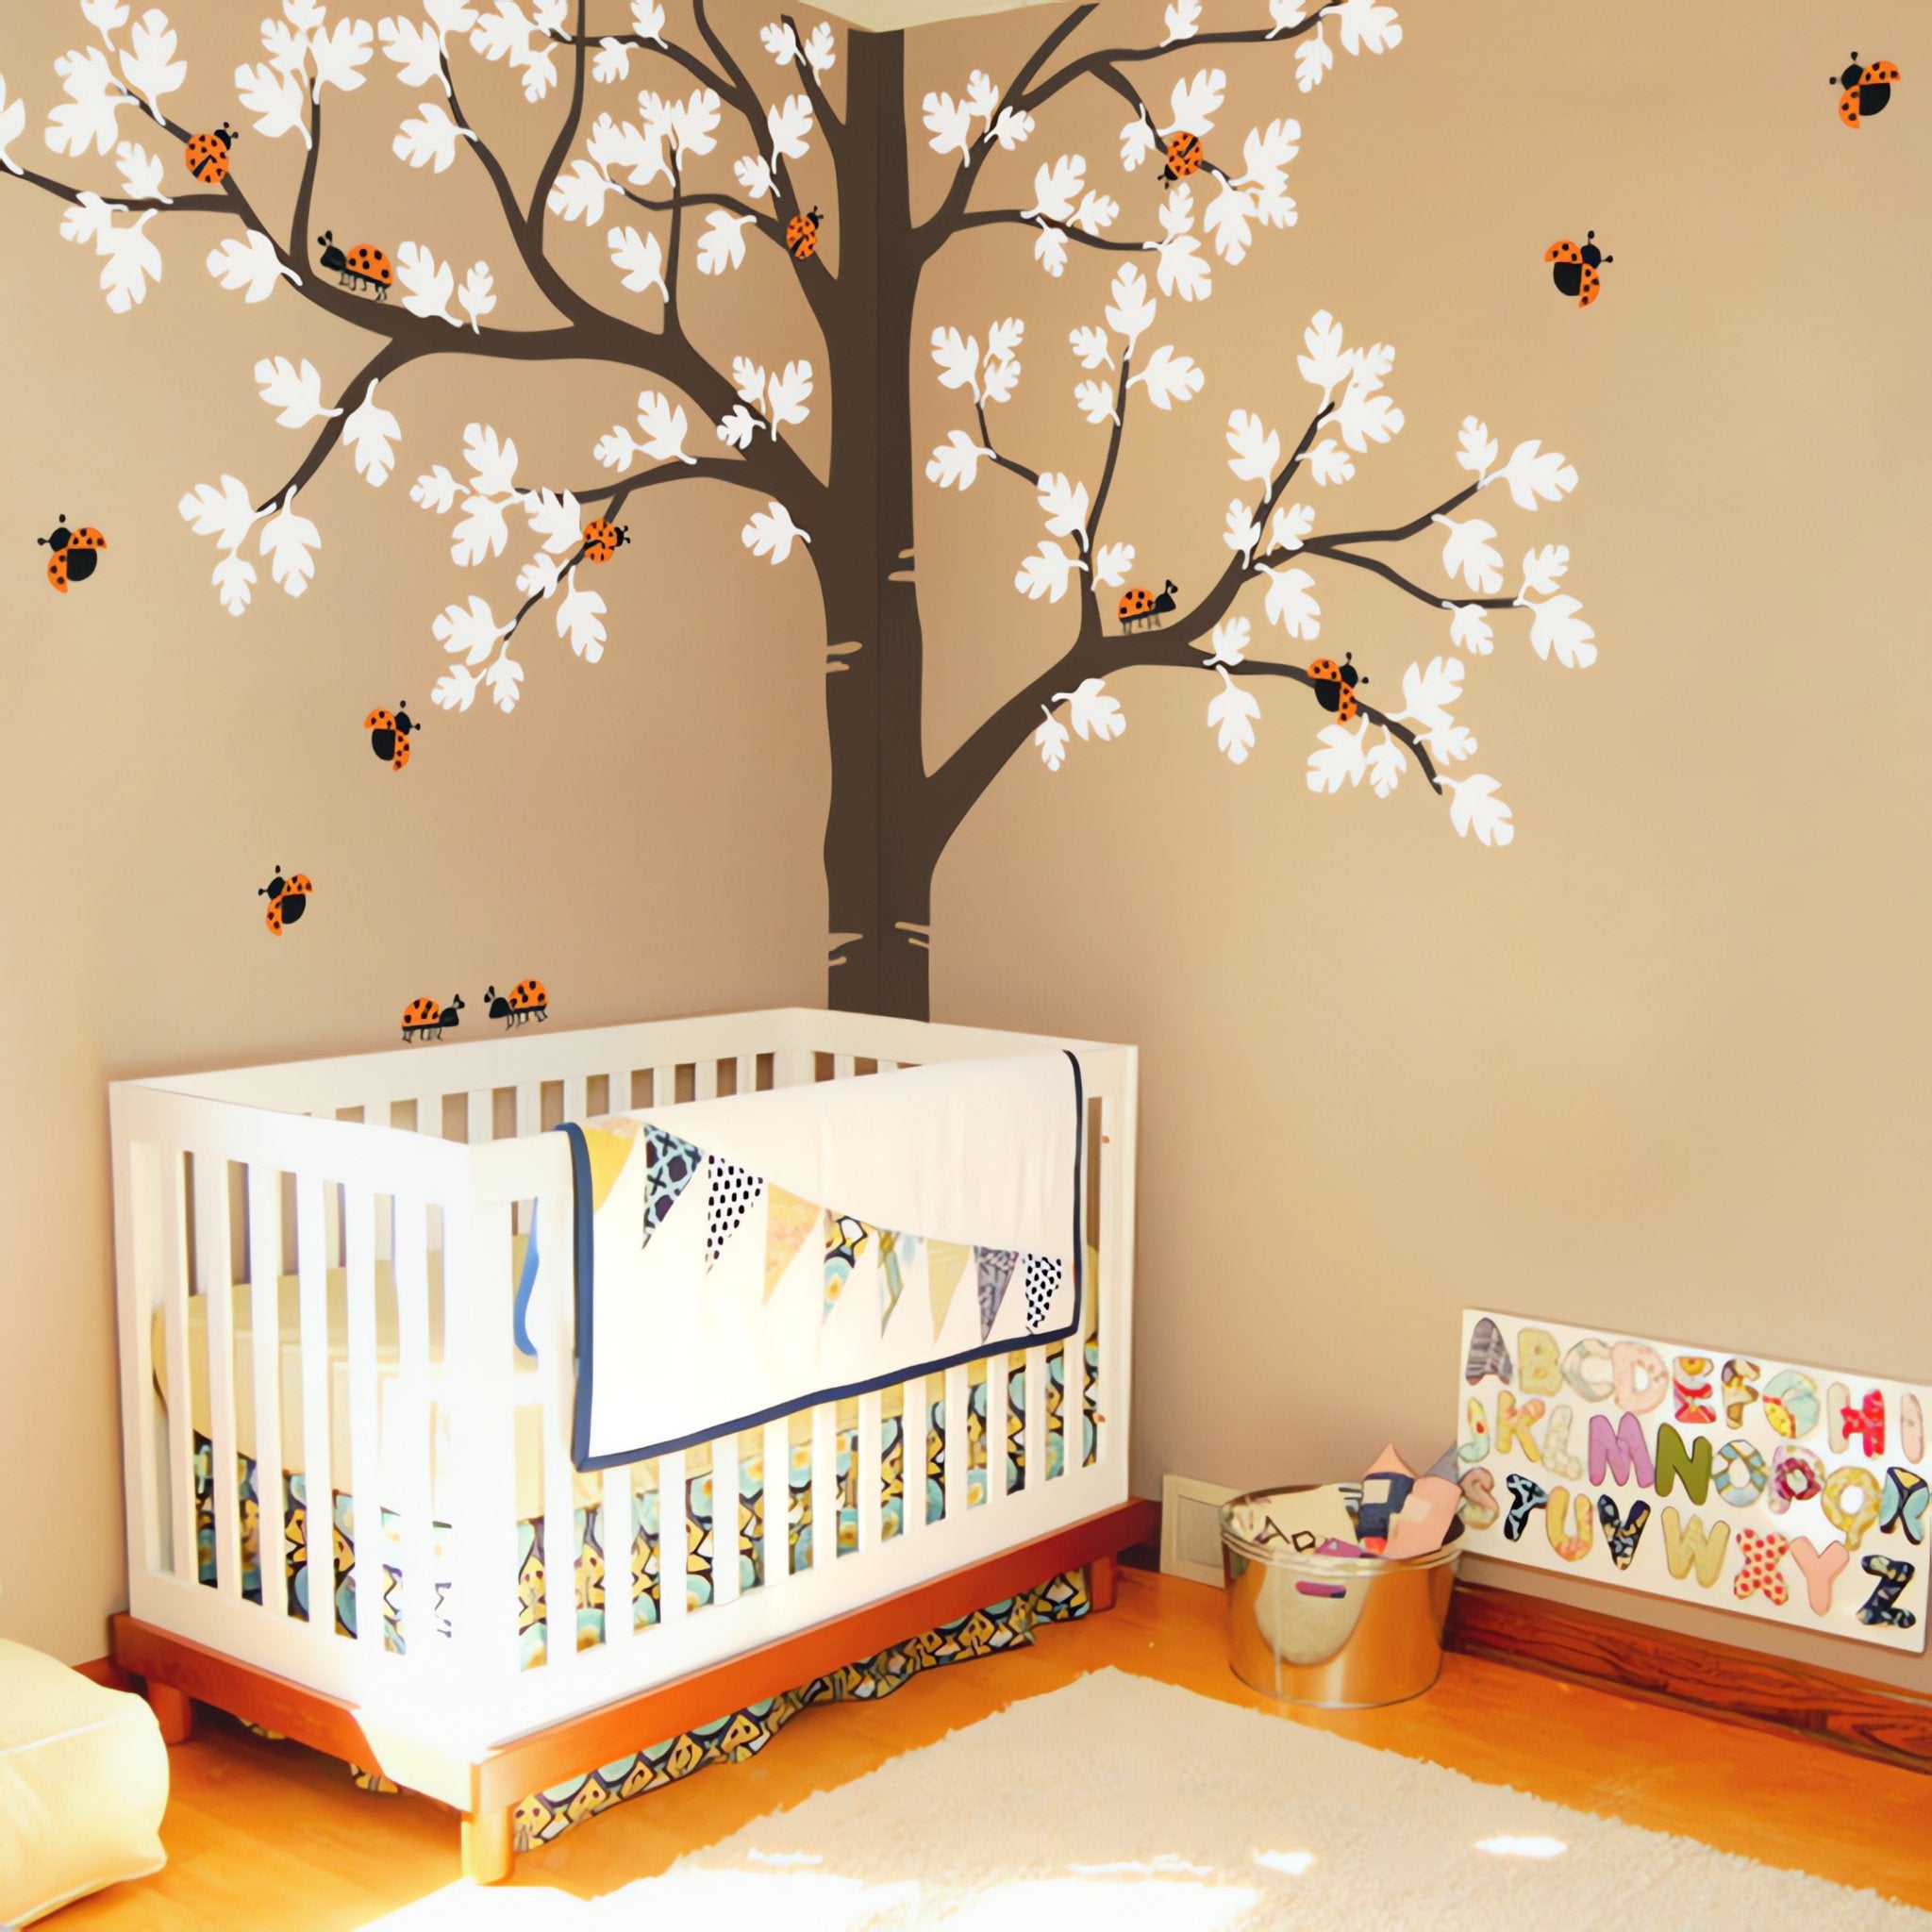 Corner tree wall sticker with a split trunk and ladybirds in a nursery with a crib and toys.